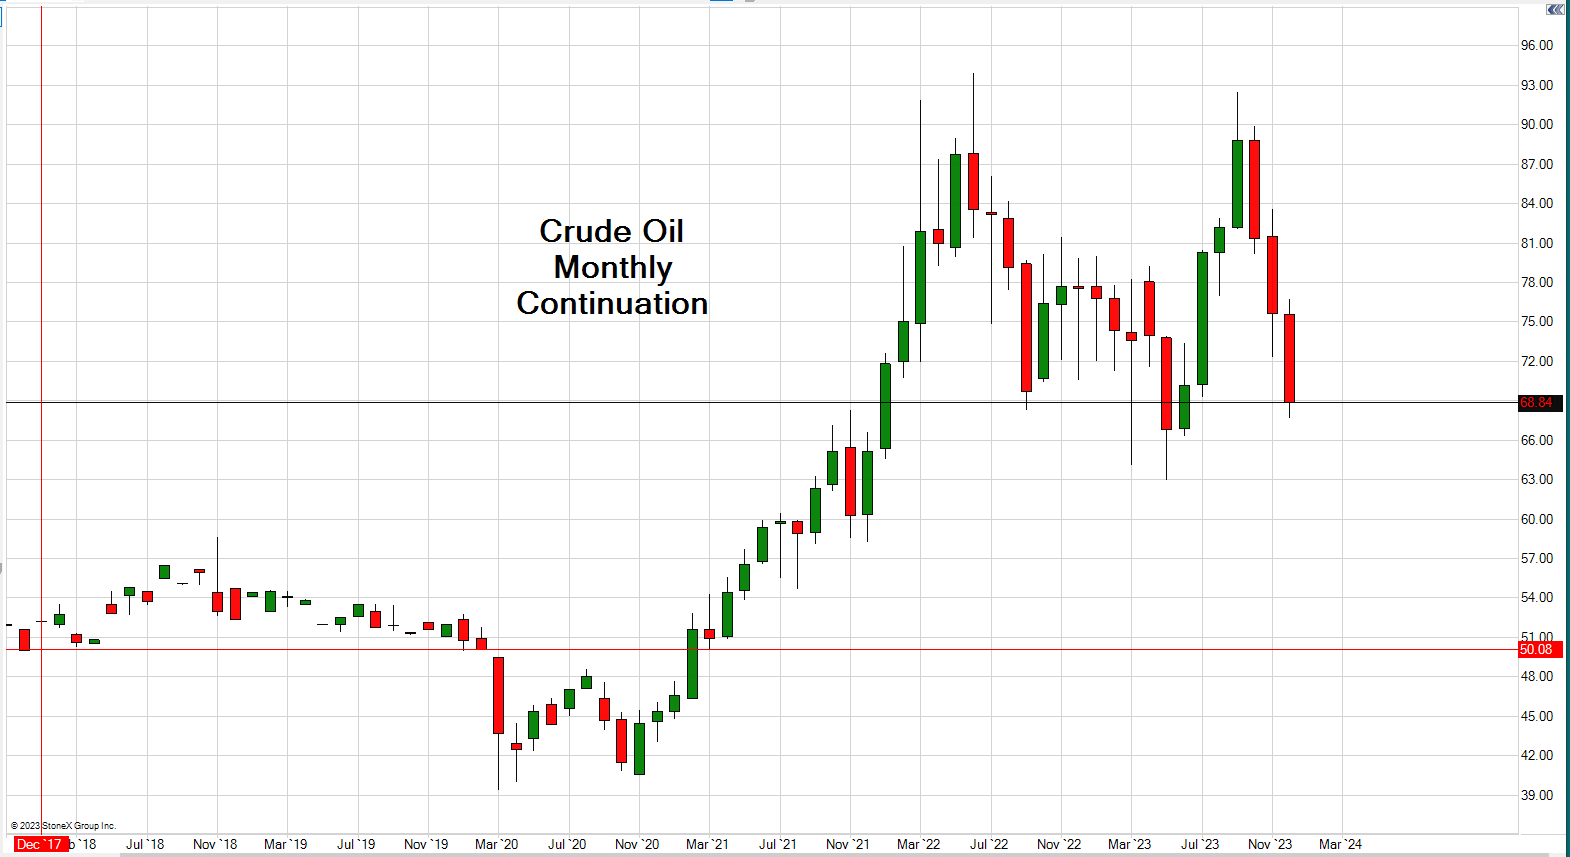 Light Crude Oil Futures Trading Chart updated March 5th, 2022